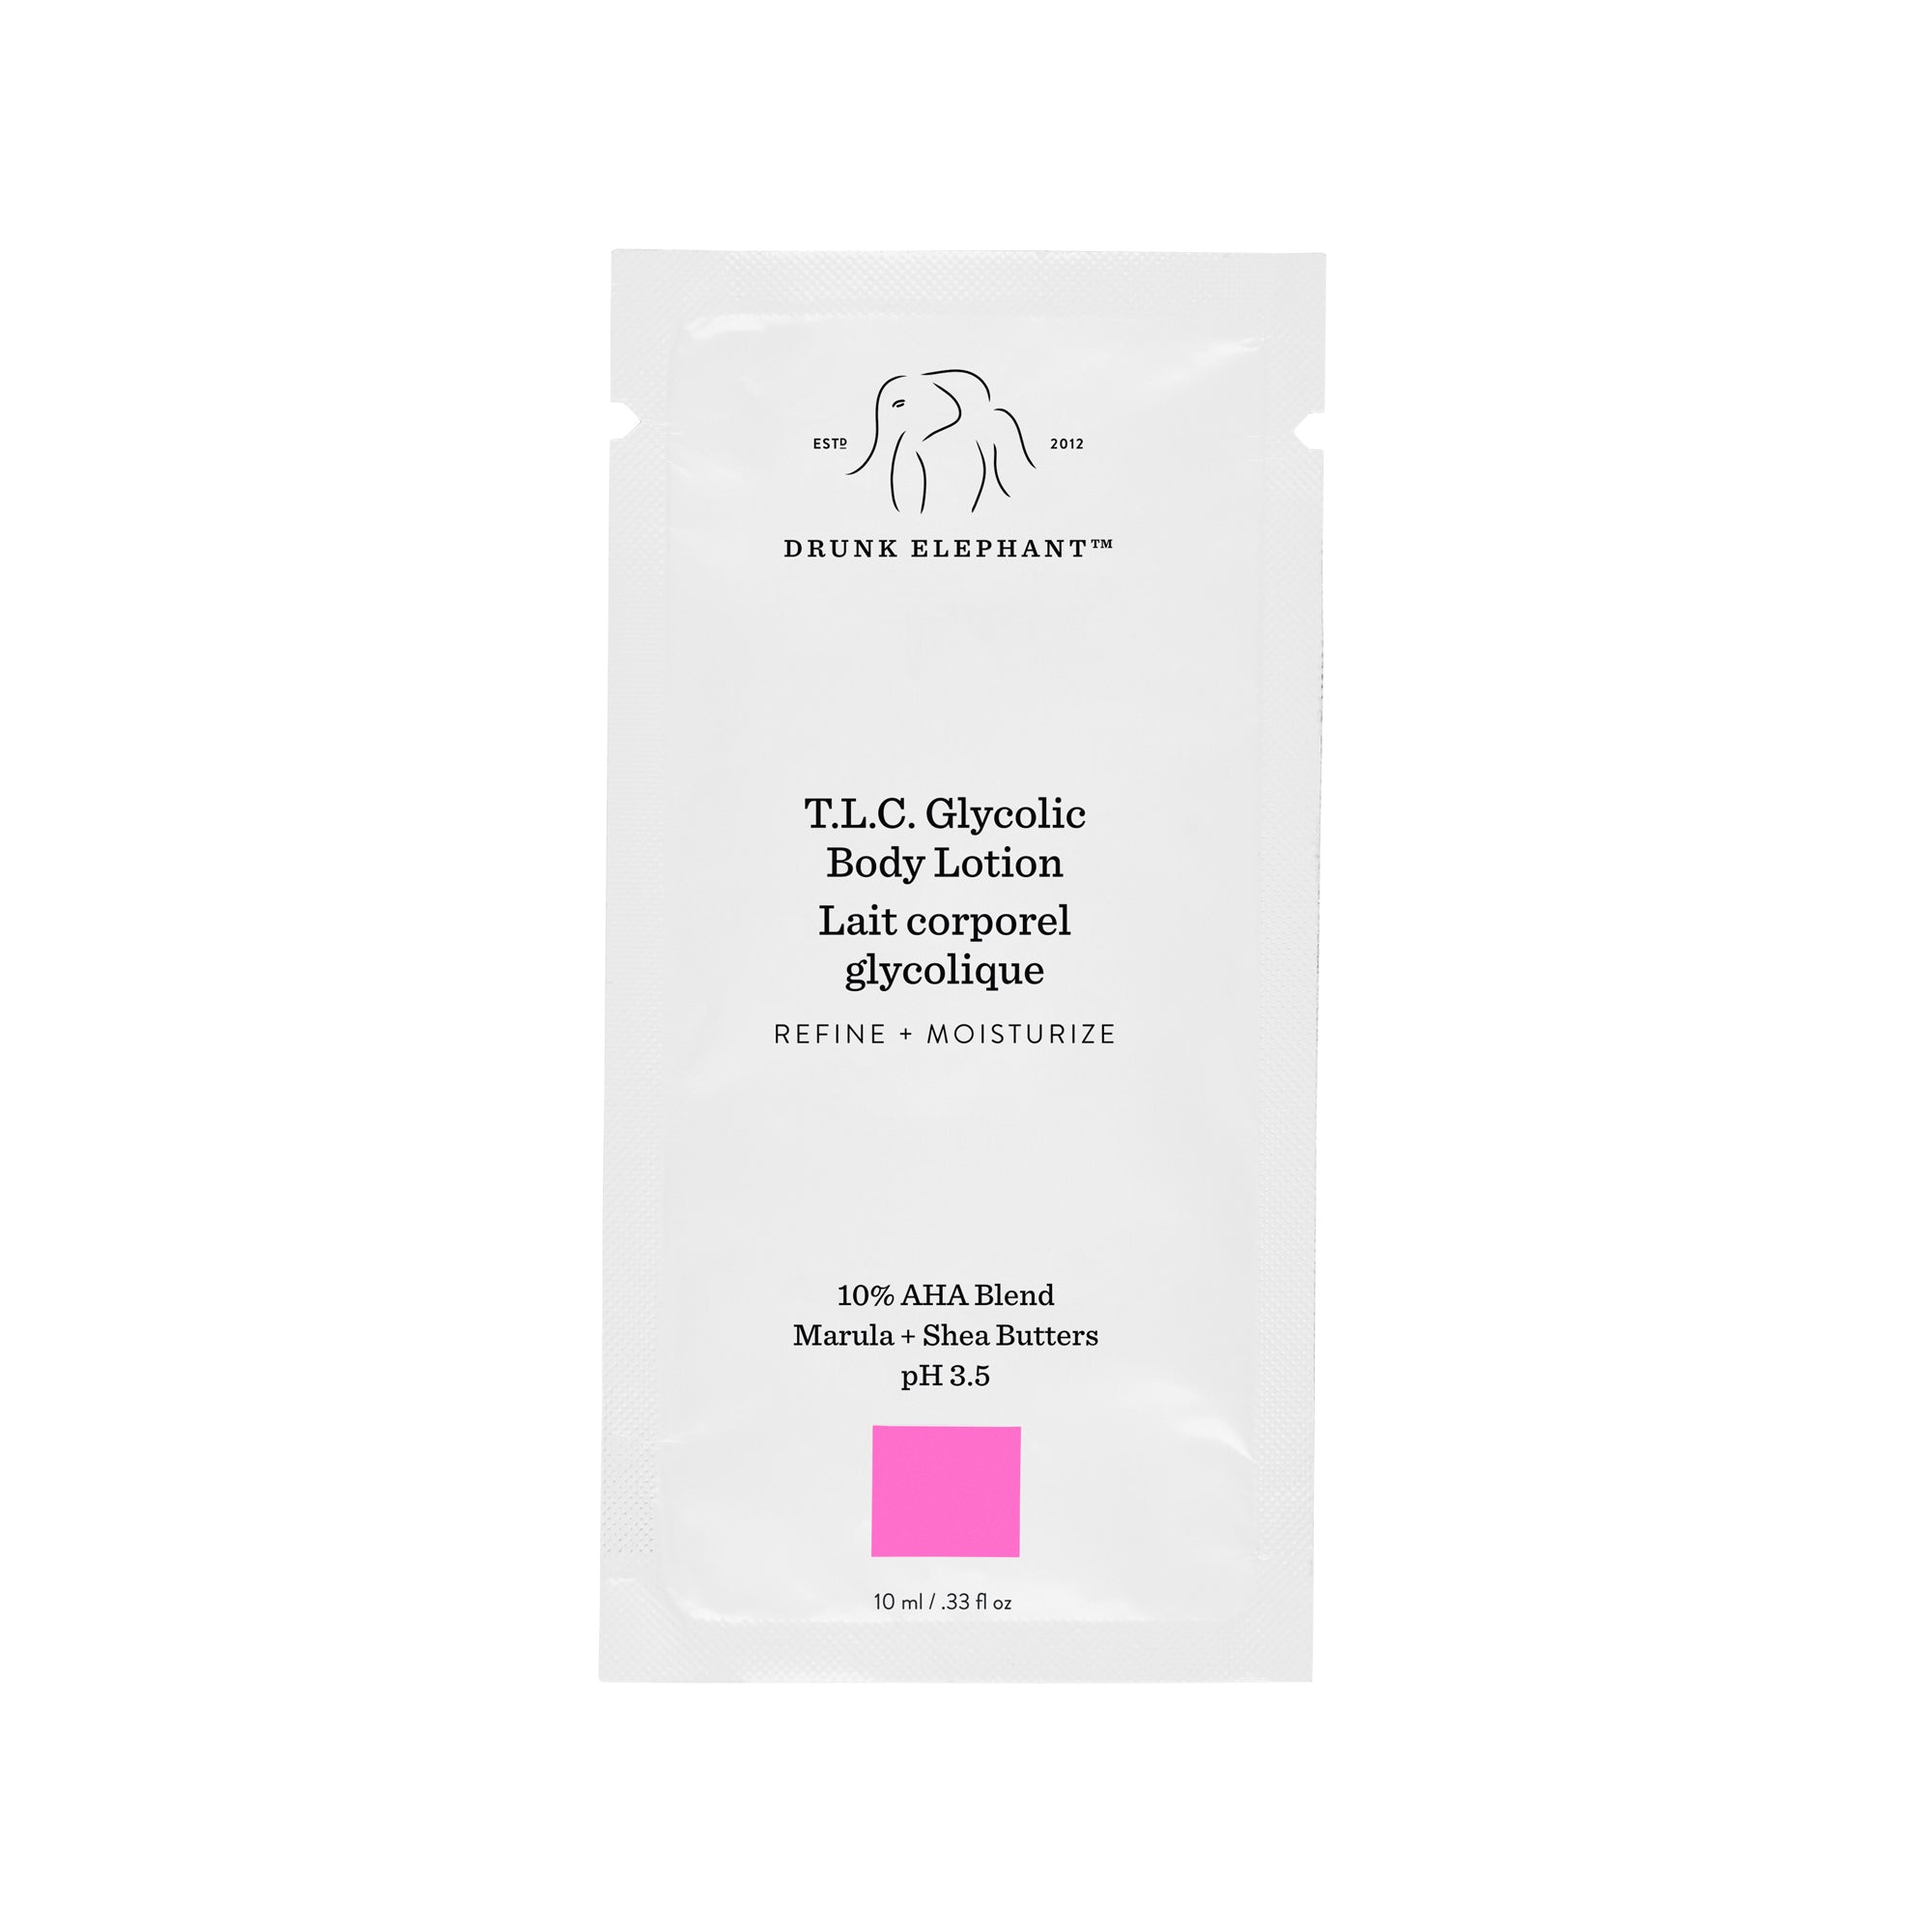 T.L.C. Glycolic Body Lotion Packette Sample